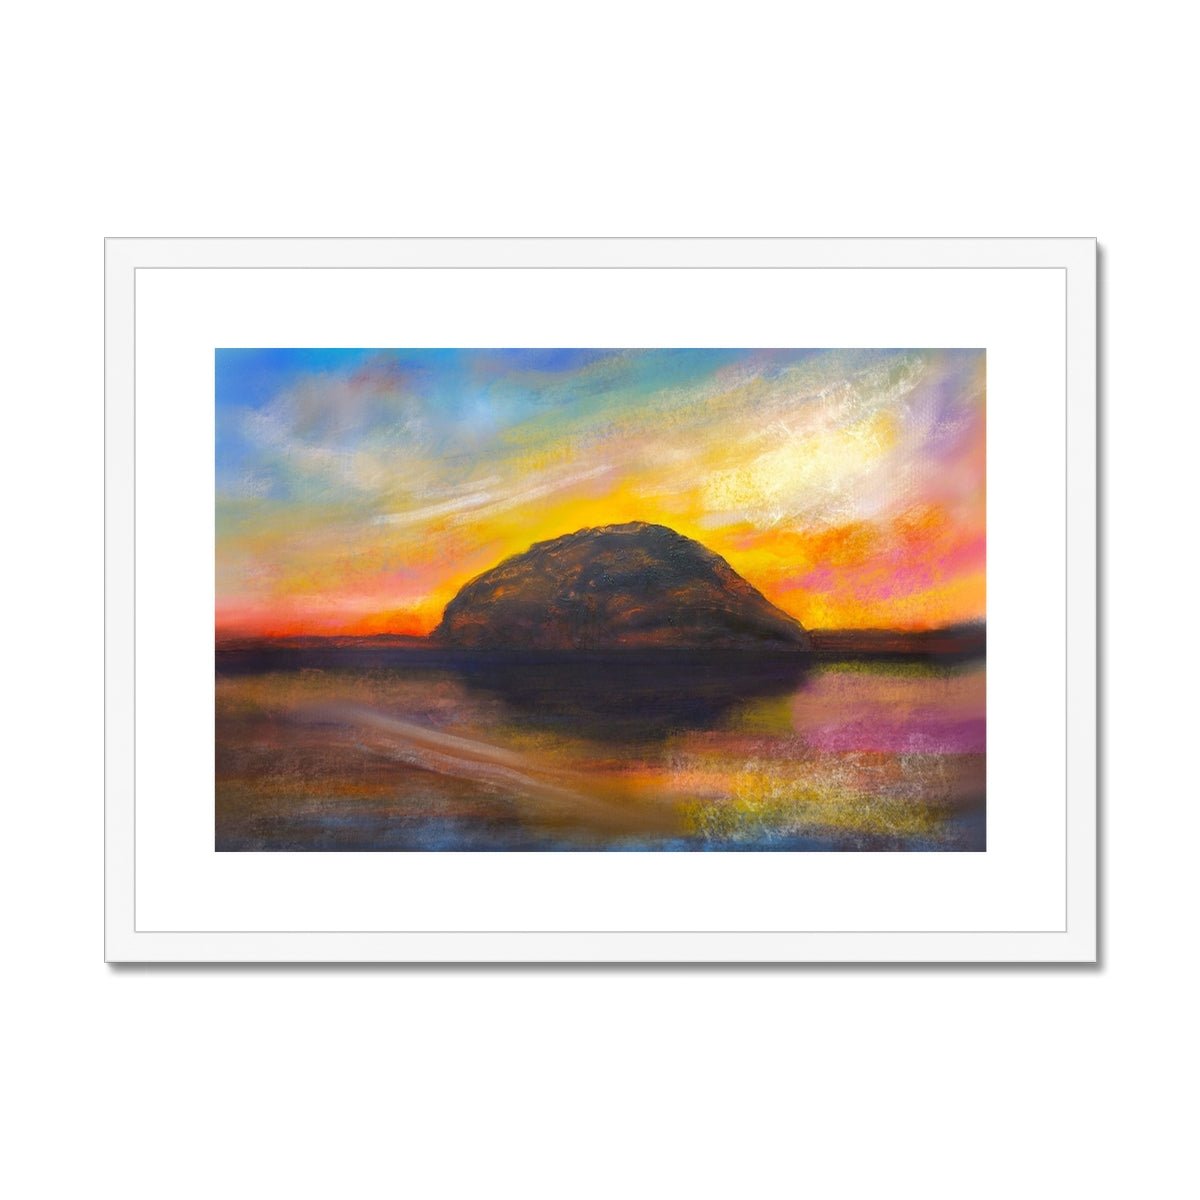 Ailsa Craig Dusk Painting | Framed & Mounted Prints From Scotland-Framed & Mounted Prints-Arran Art Gallery-A2 Landscape-White Frame-Paintings, Prints, Homeware, Art Gifts From Scotland By Scottish Artist Kevin Hunter